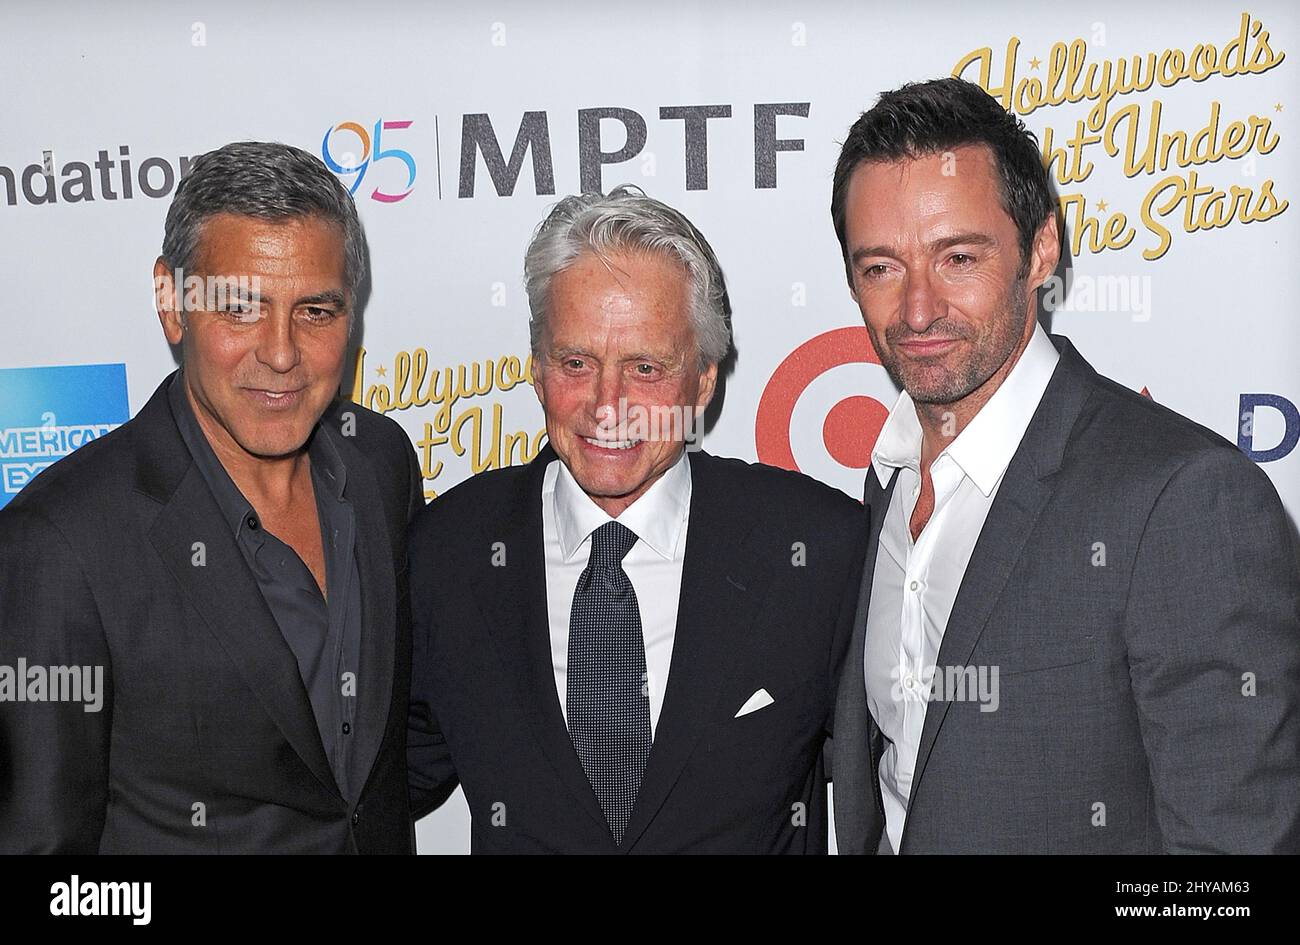 George Clooney, Michael Douglas, Hugh Jackman attending the 'Hollywood's Night Under The Stars' 95th Anniversary Celebration held at MPTF Wasserman Campus in Los Angeles, USA. Stock Photo